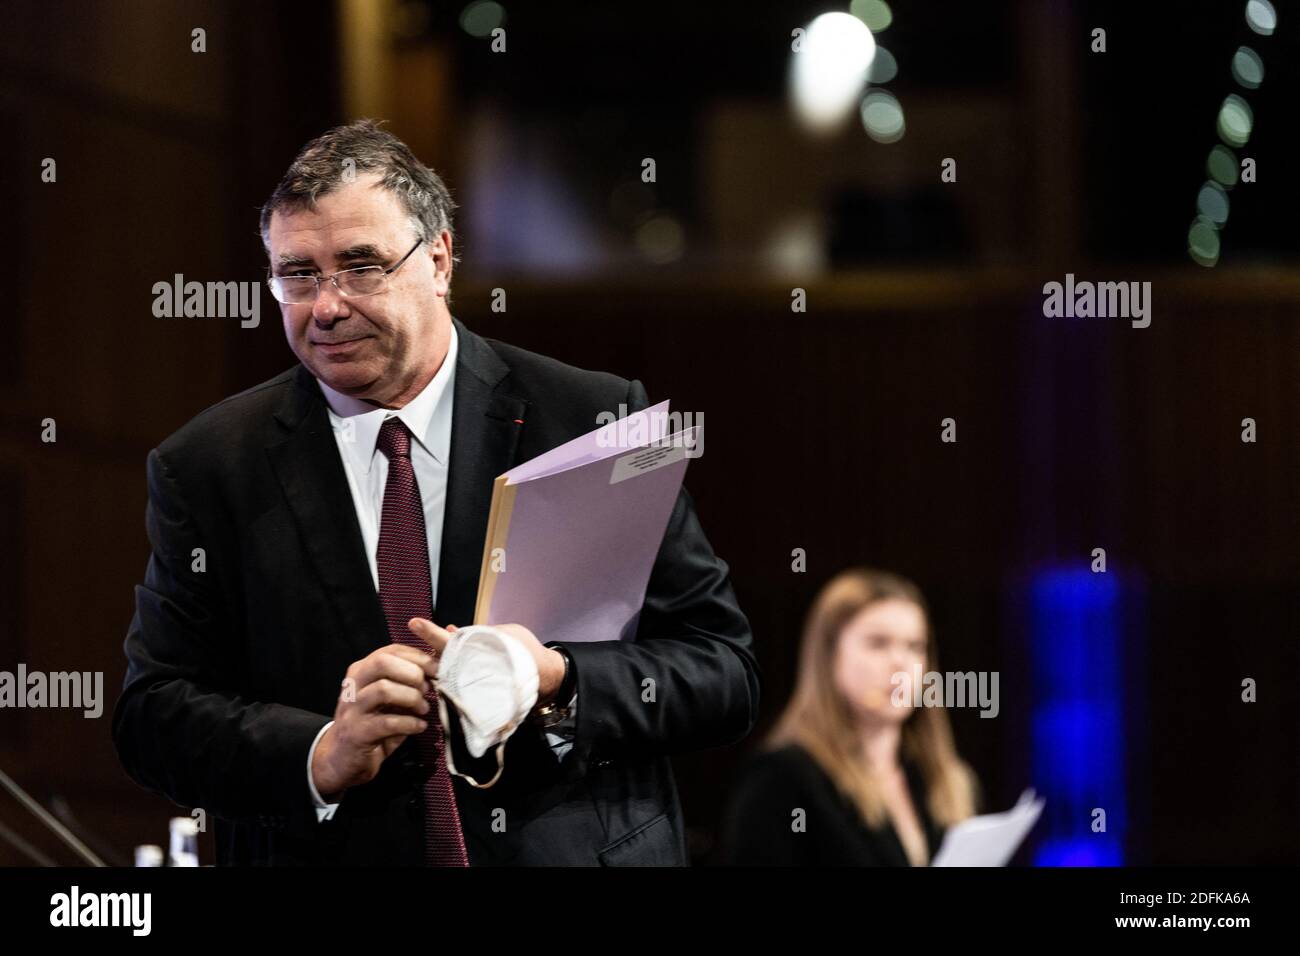 Patrick Poyanne, Cherman and CEO of Total, during the inaugural day of the Paris Infraweek 2020 held at the ministry of economy, finances and reflation at Bercy. Paris, France, October 5, 2020. Photo by Daniel Derajinksi/ABACAPRESS.COM Stock Photo